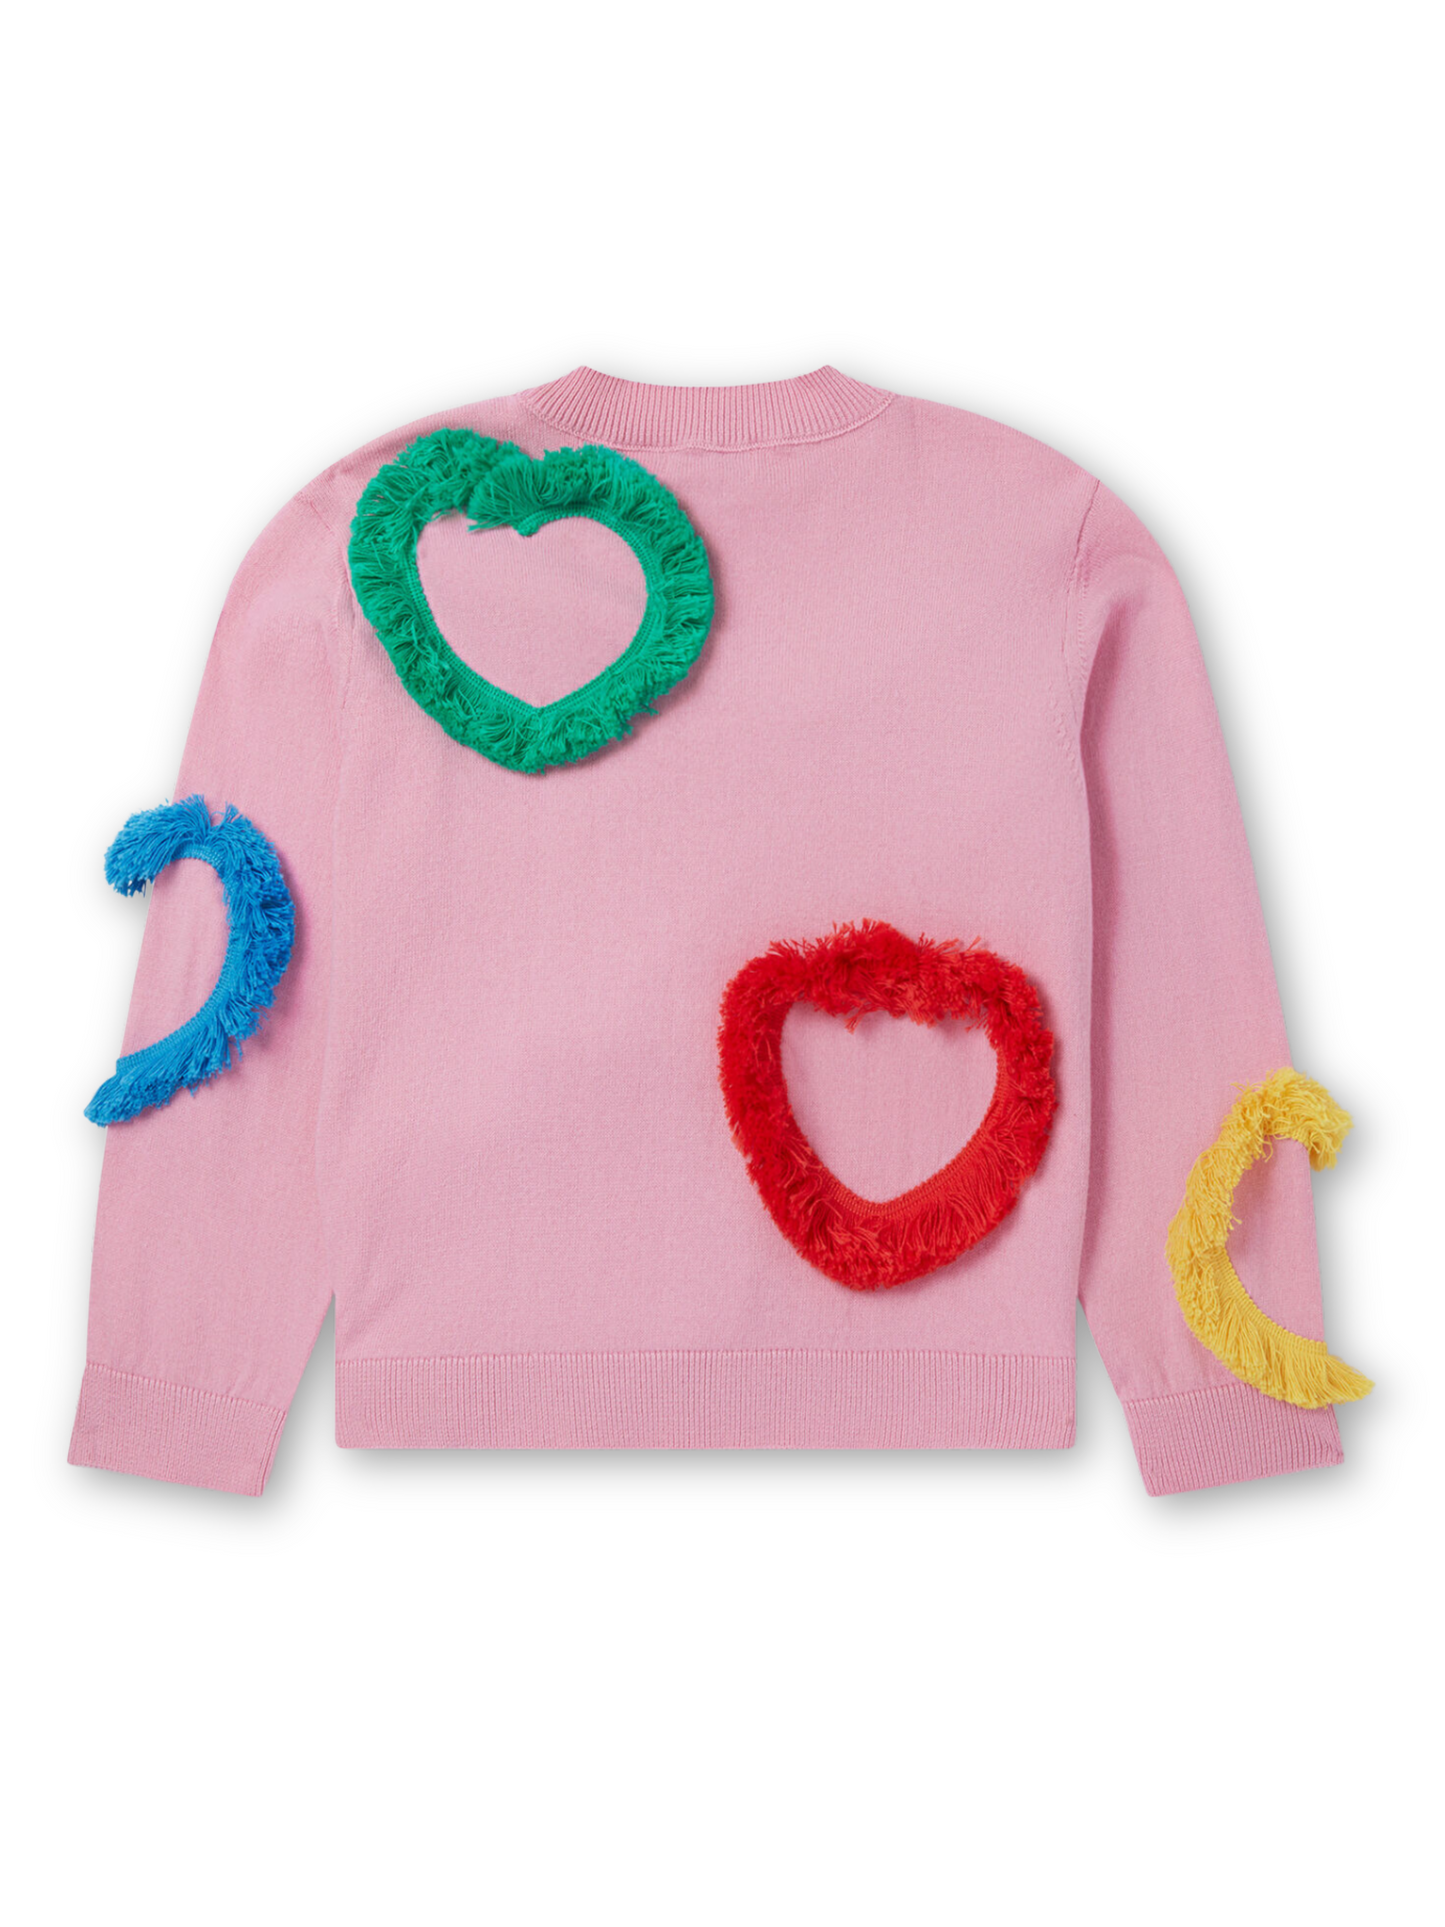 Stella McCartney Pink Sweater With Fringy Multicolor Hearts _TT9B70Z1562-547